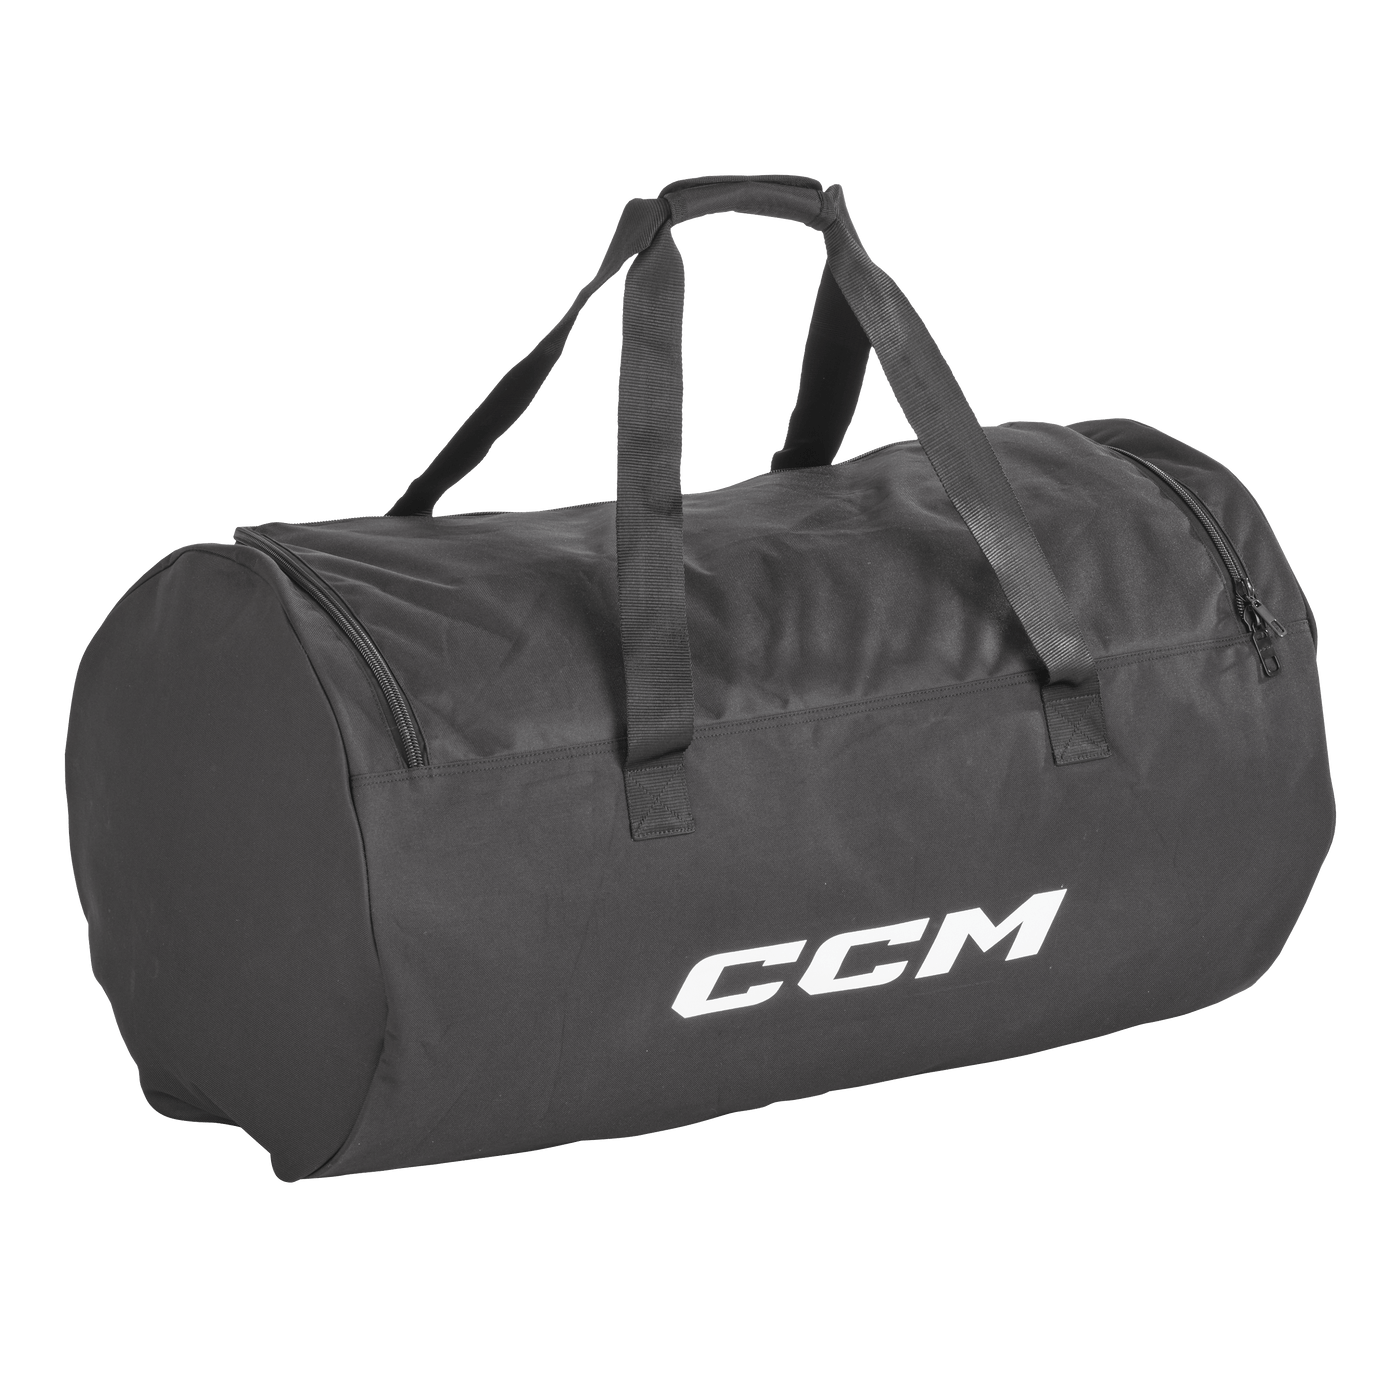 CCM 410 Basic Youth Carry Hockey Bag - The Hockey Shop Source For Sports